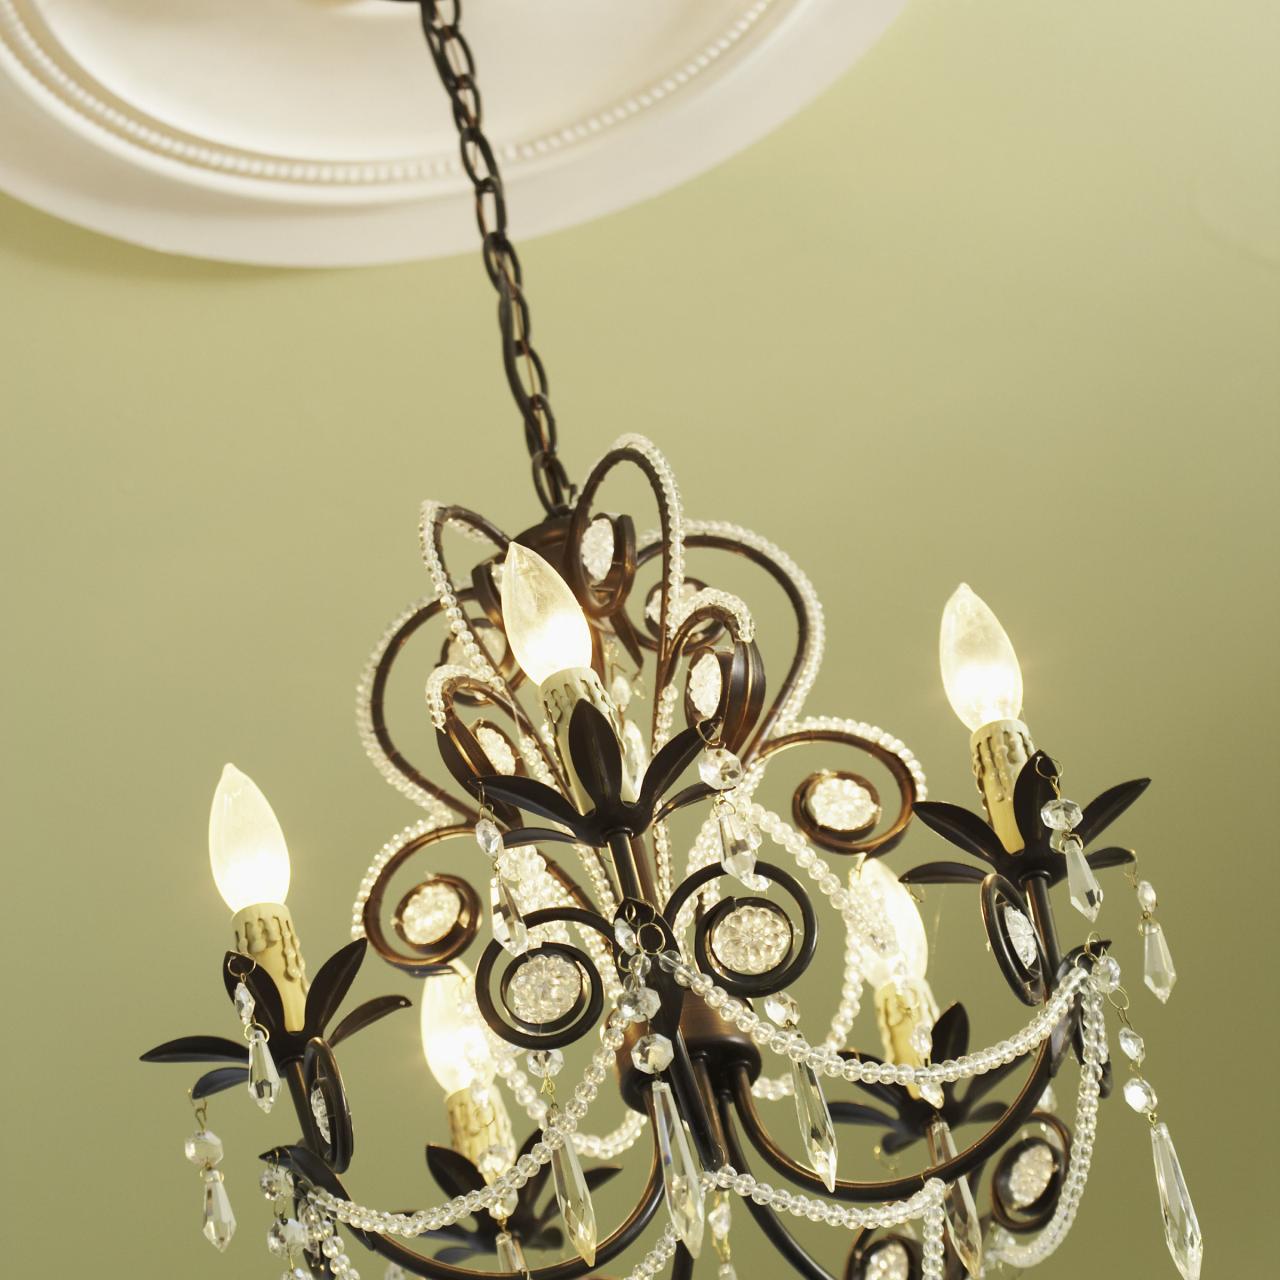 How To Install A Decorative Ceiling Medallion Hgtv